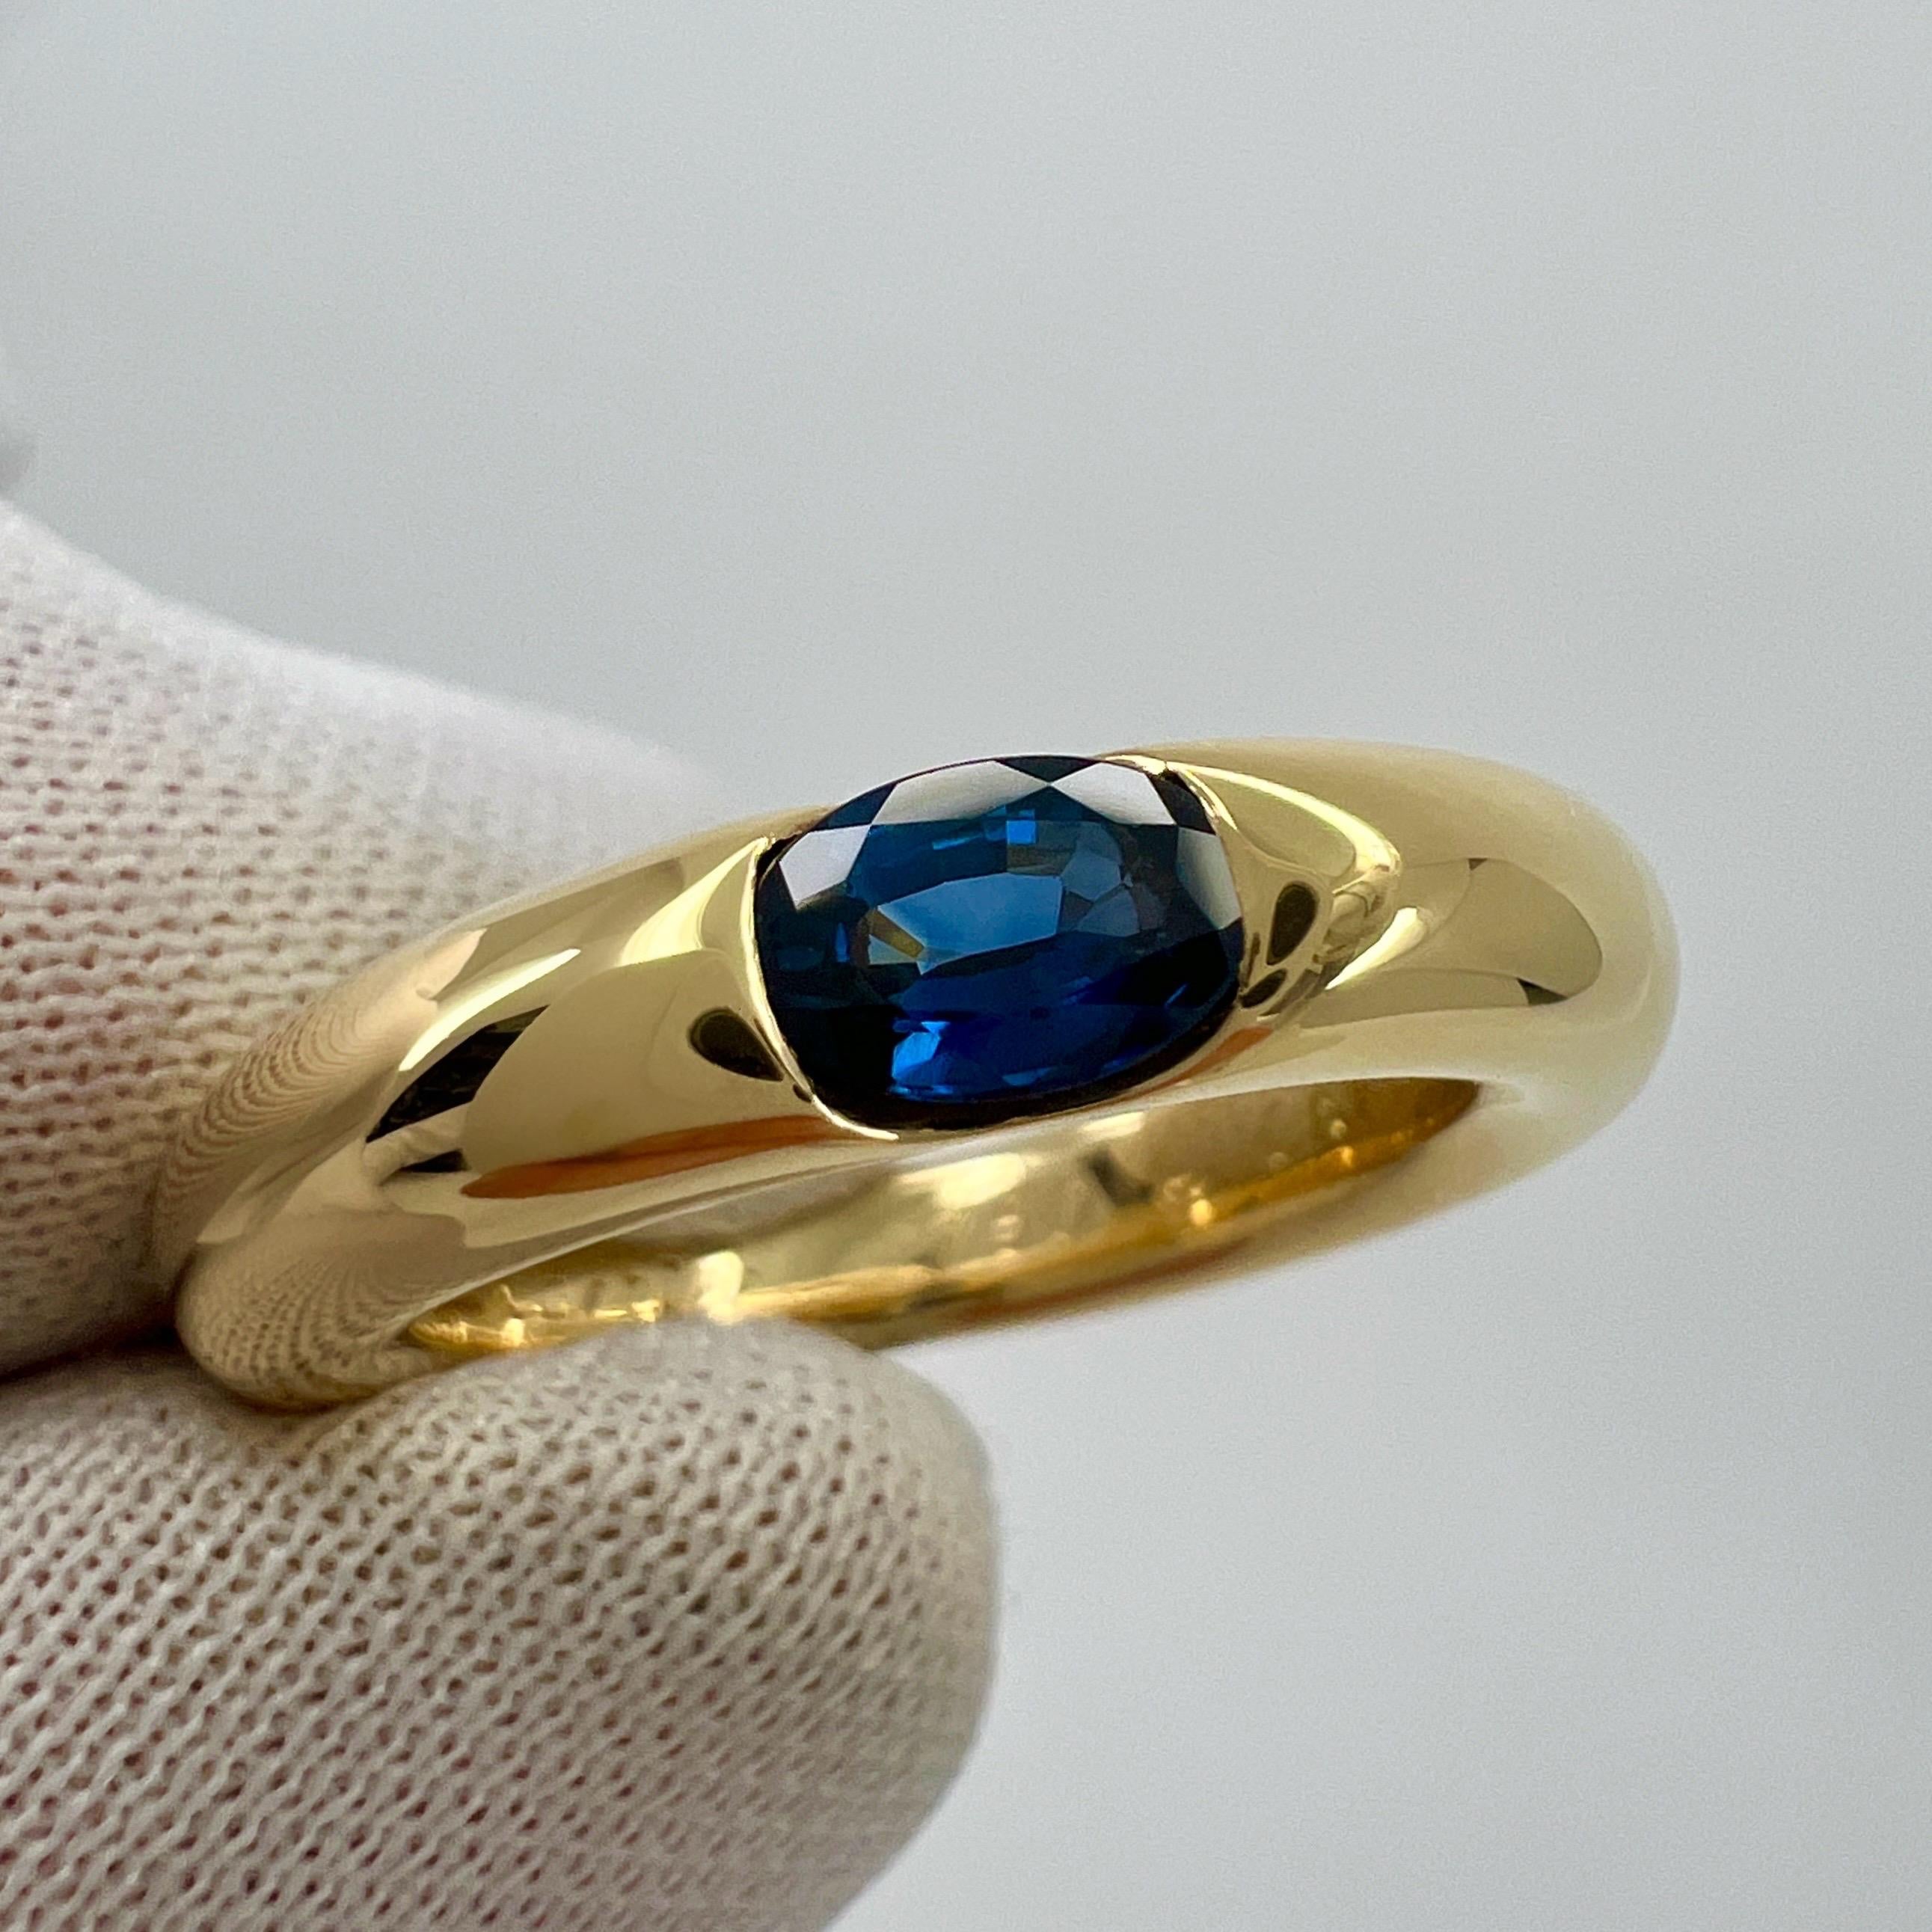 Vintage Cartier Blue Sapphire Oval Ellipse 18k Yellow Gold Solitaire Ring US5 49 In Excellent Condition For Sale In Birmingham, GB